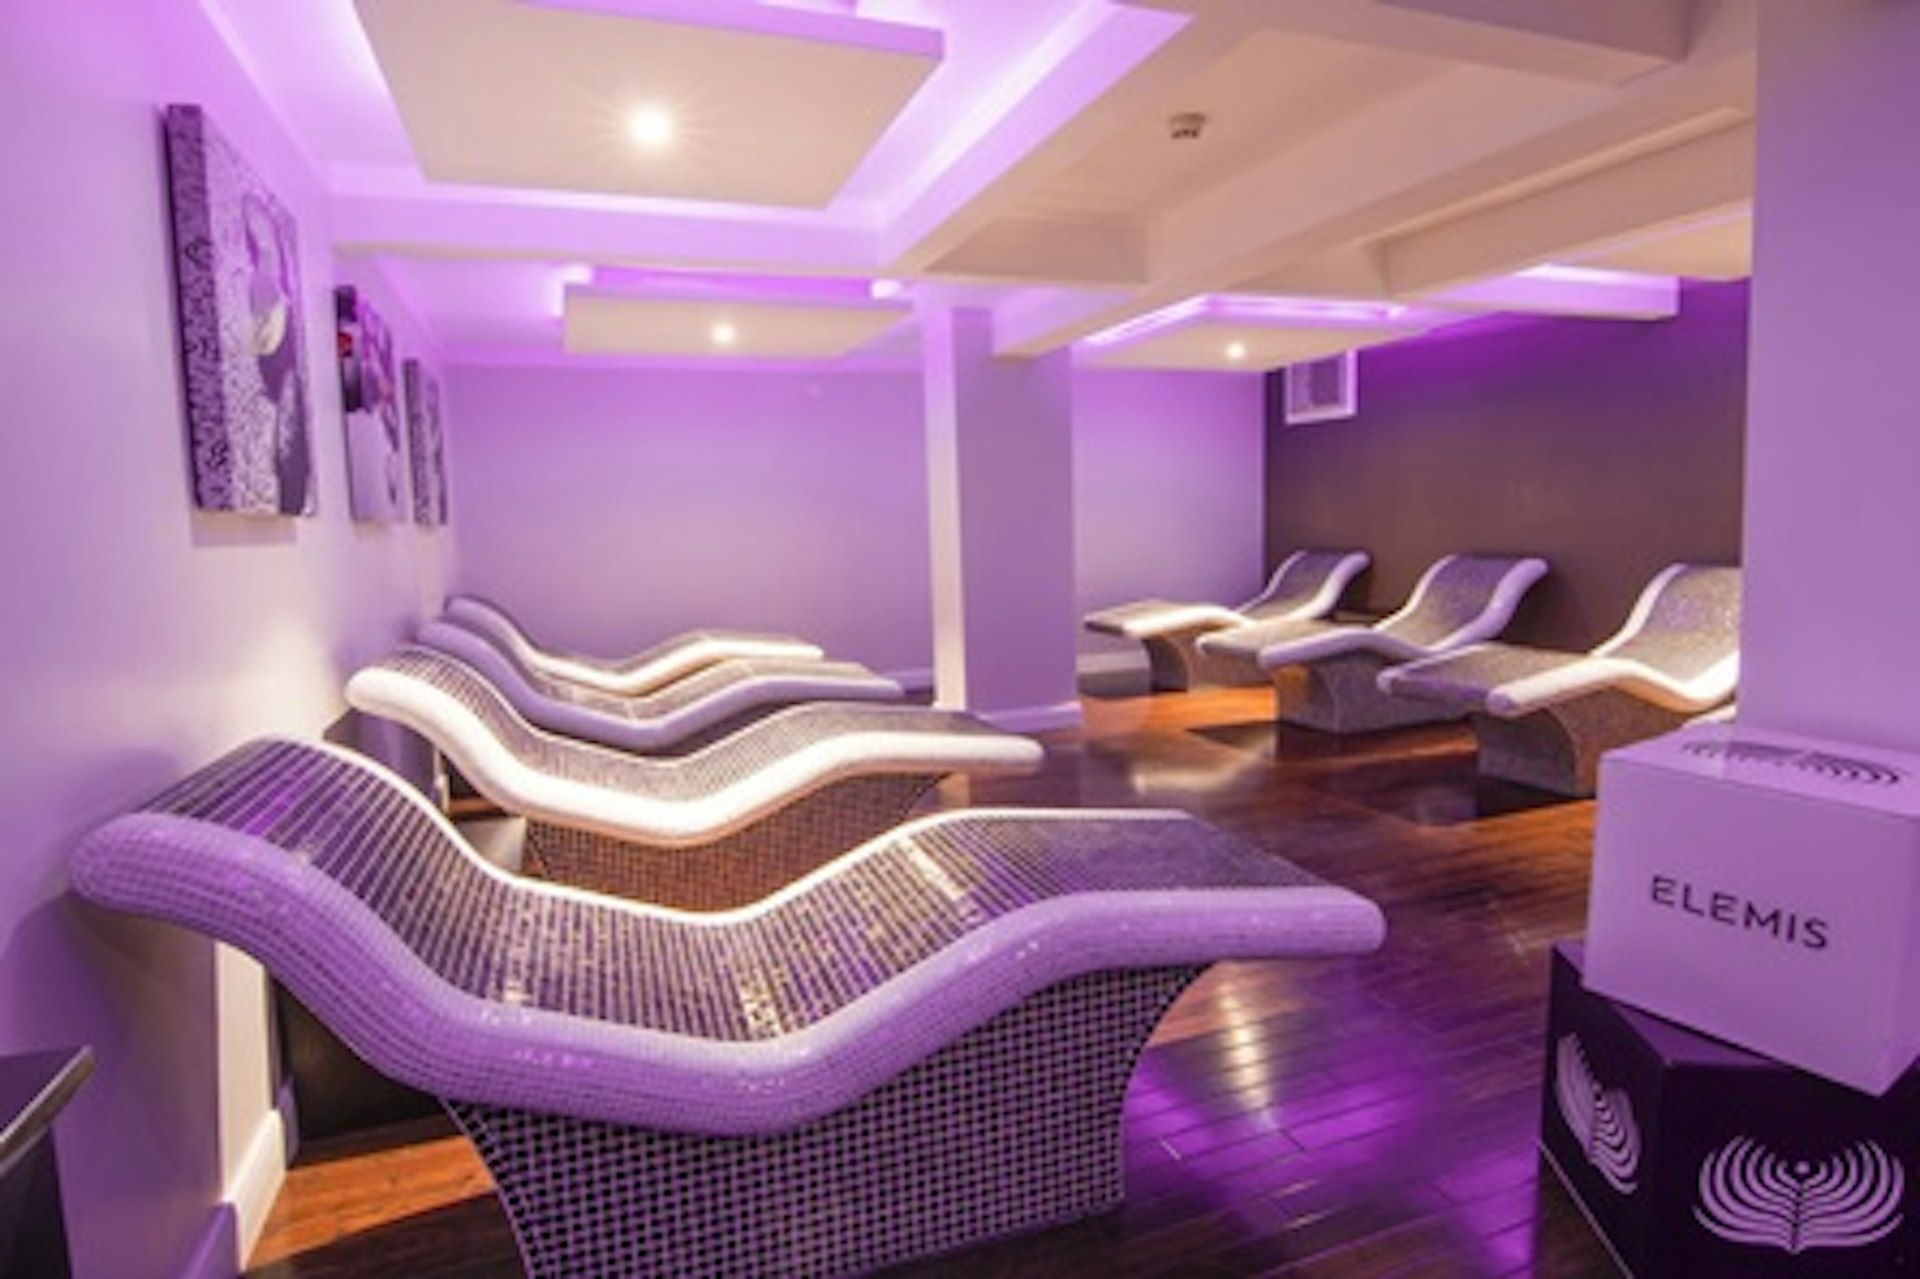 Deluxe Spa Day with Three Treatments for Two at Bannatyne Health Clubs 2